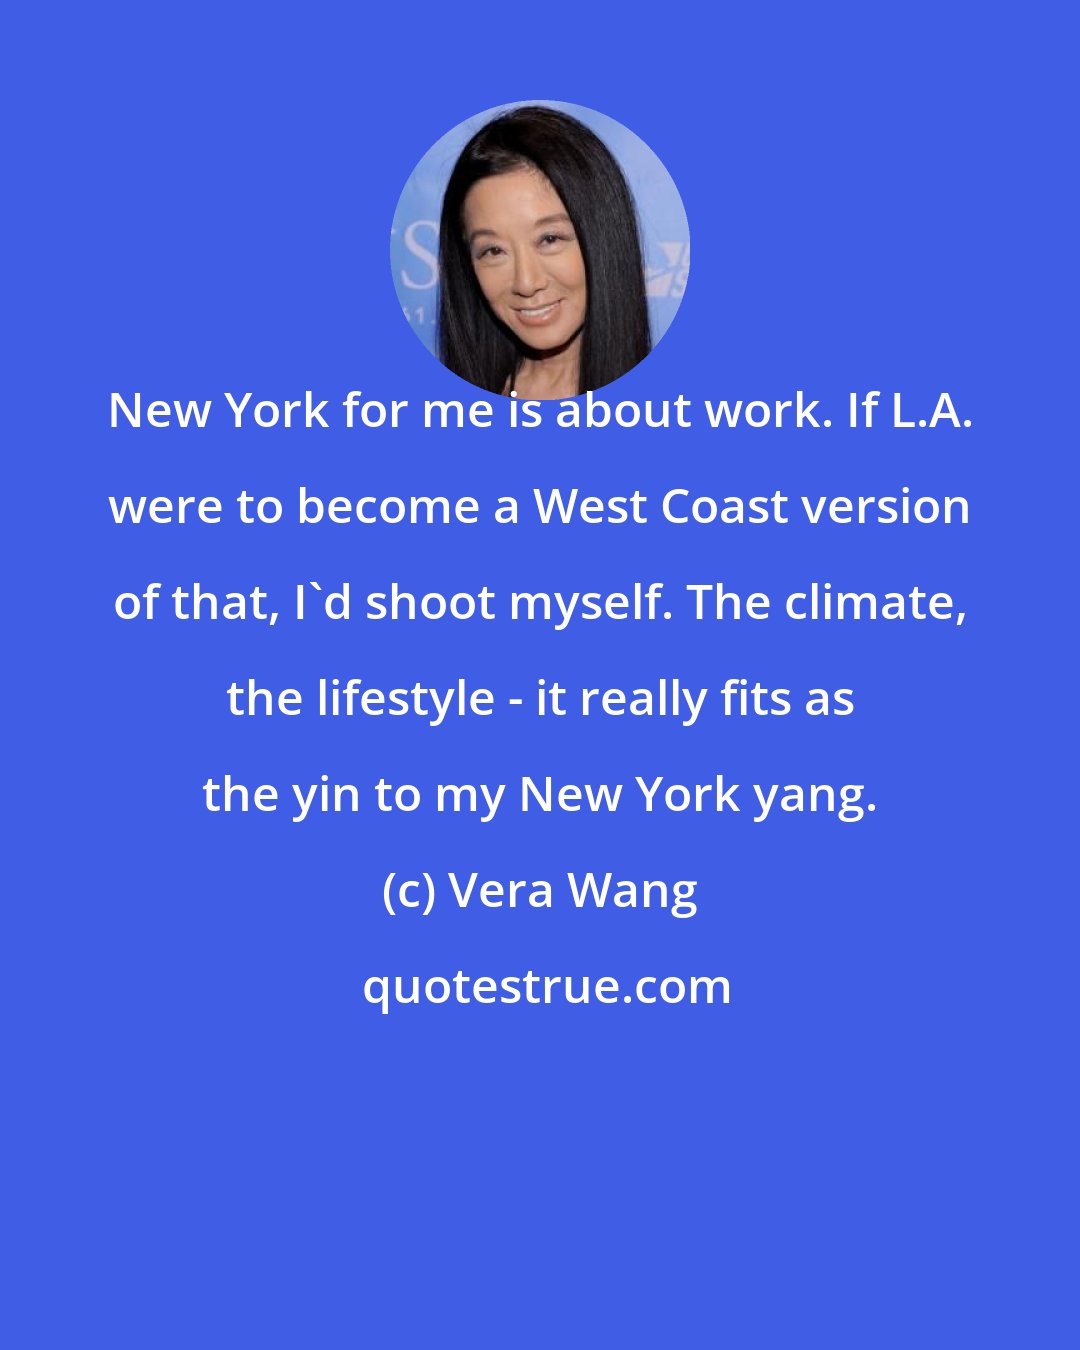 Vera Wang: New York for me is about work. If L.A. were to become a West Coast version of that, I'd shoot myself. The climate, the lifestyle - it really fits as the yin to my New York yang.